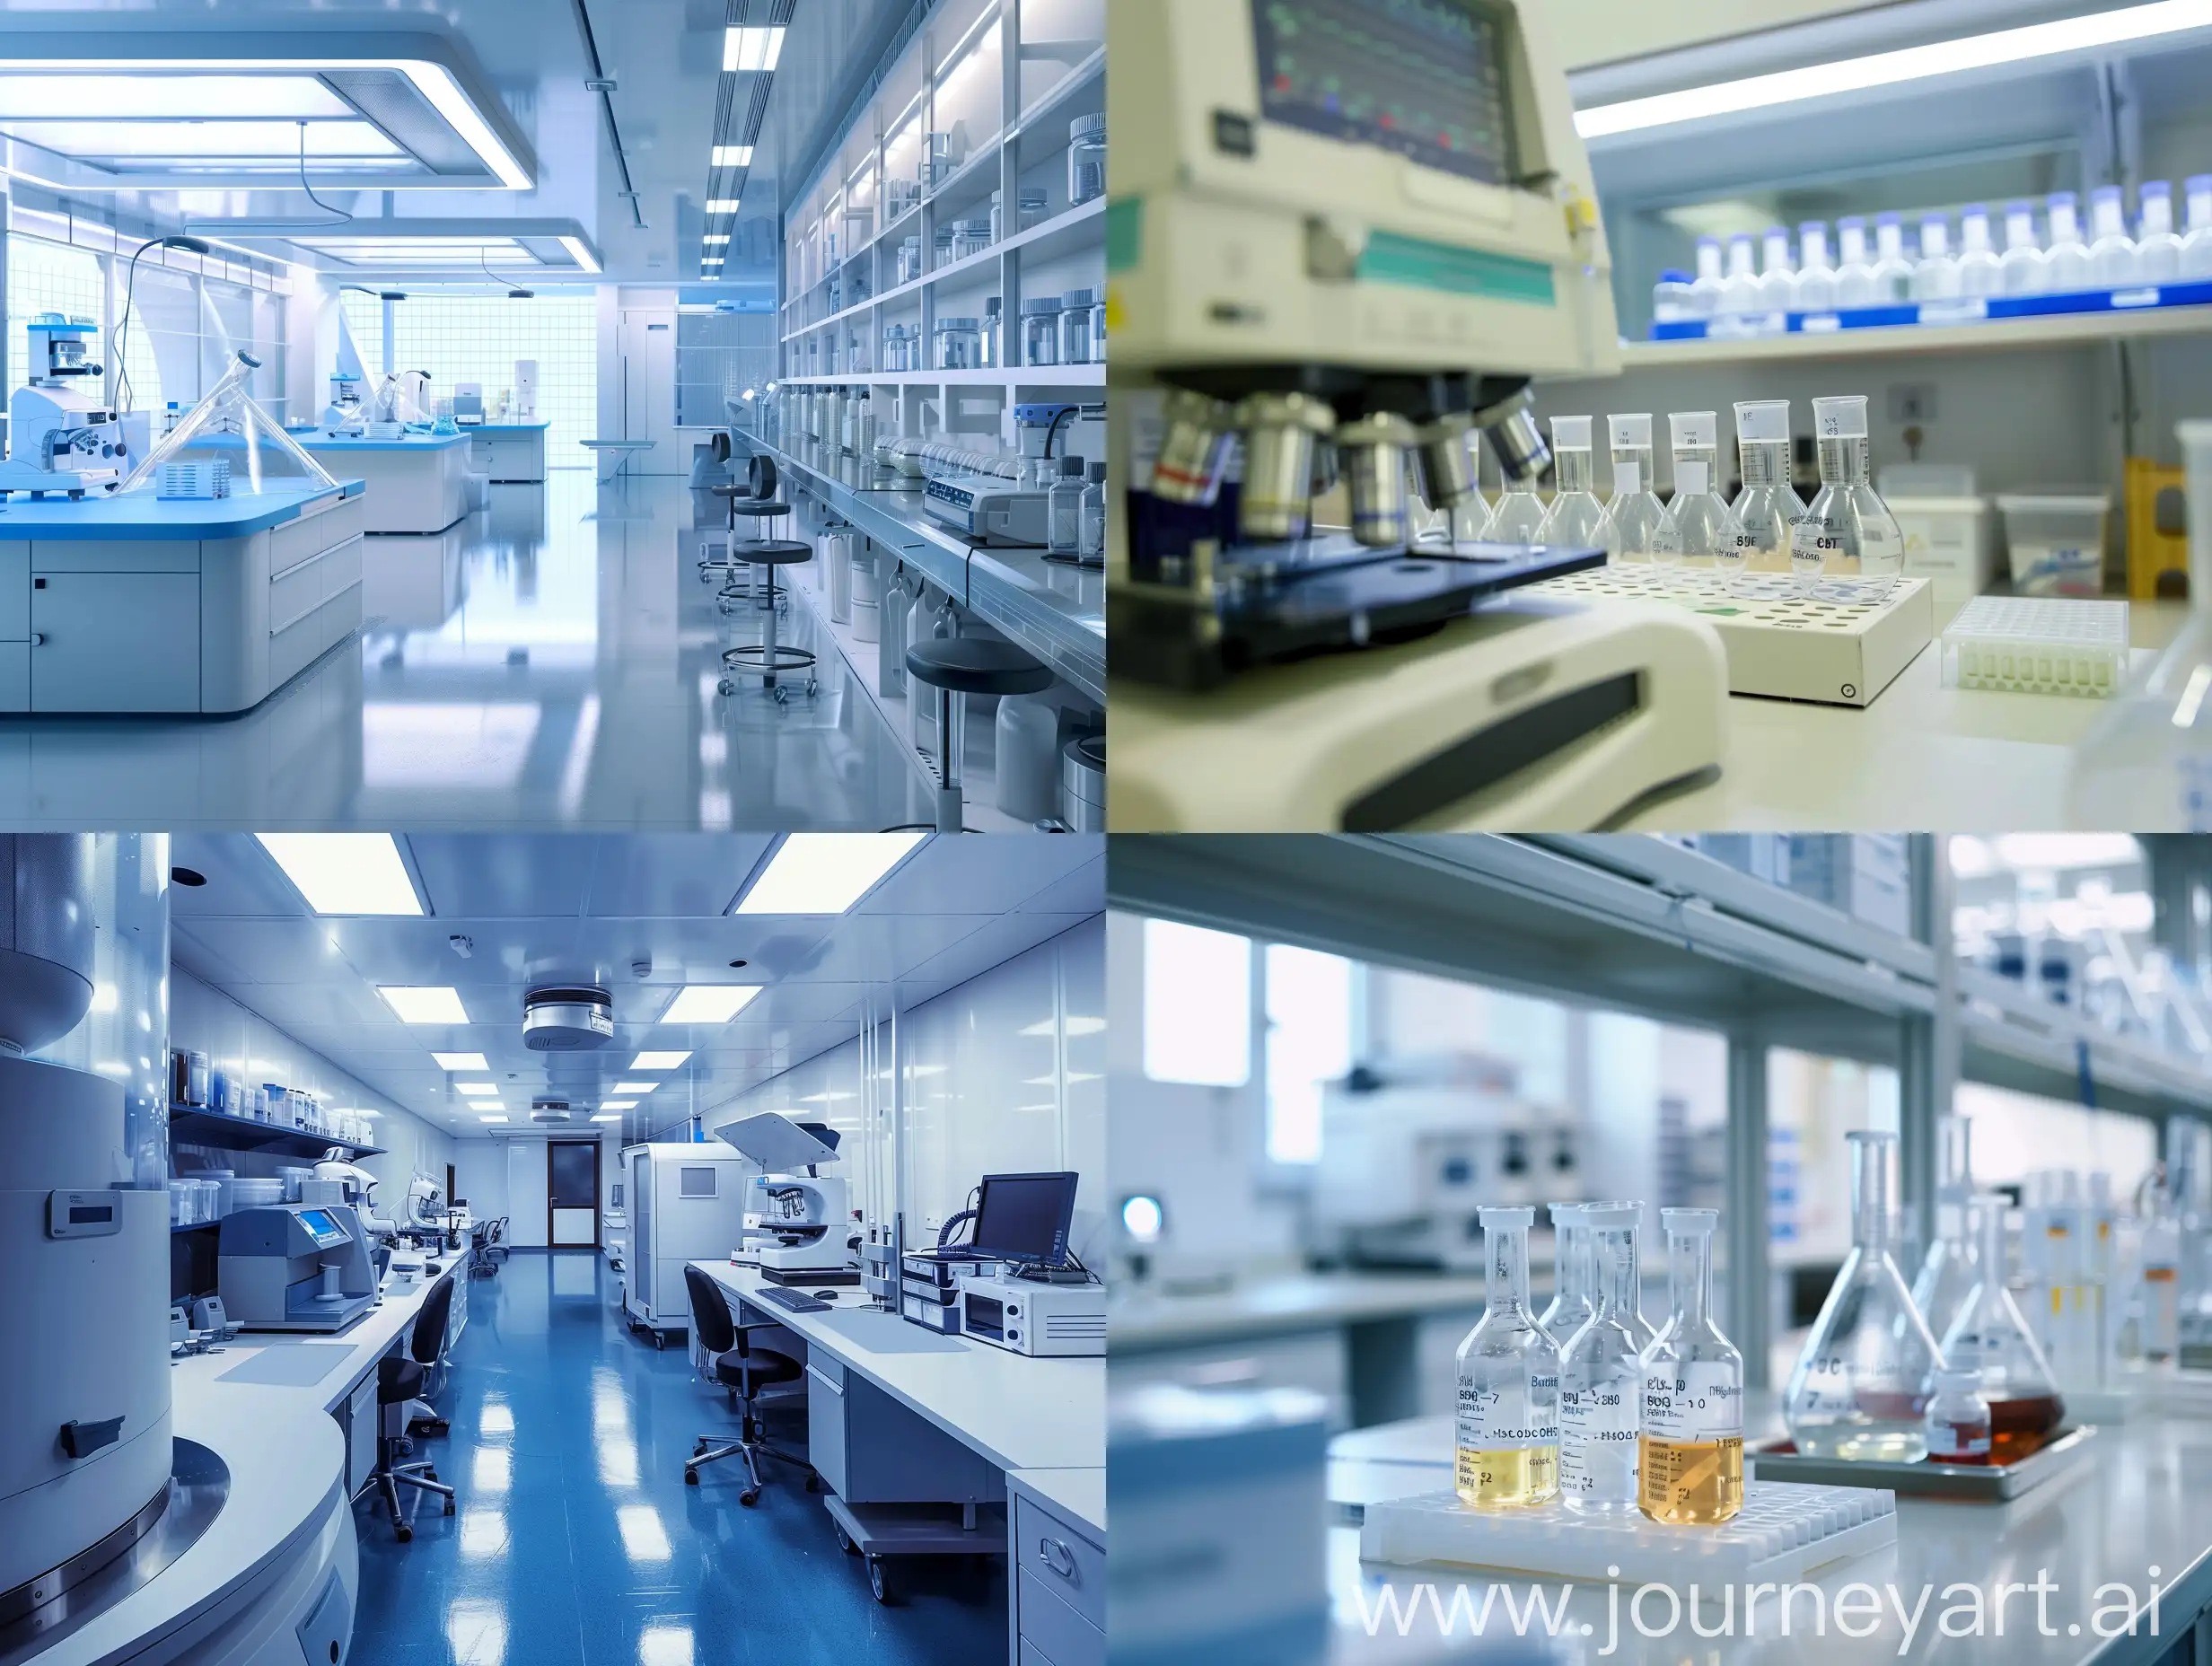 CuttingEdge-Medical-Lab-with-Advanced-Equipment-in-43-Aspect-Ratio